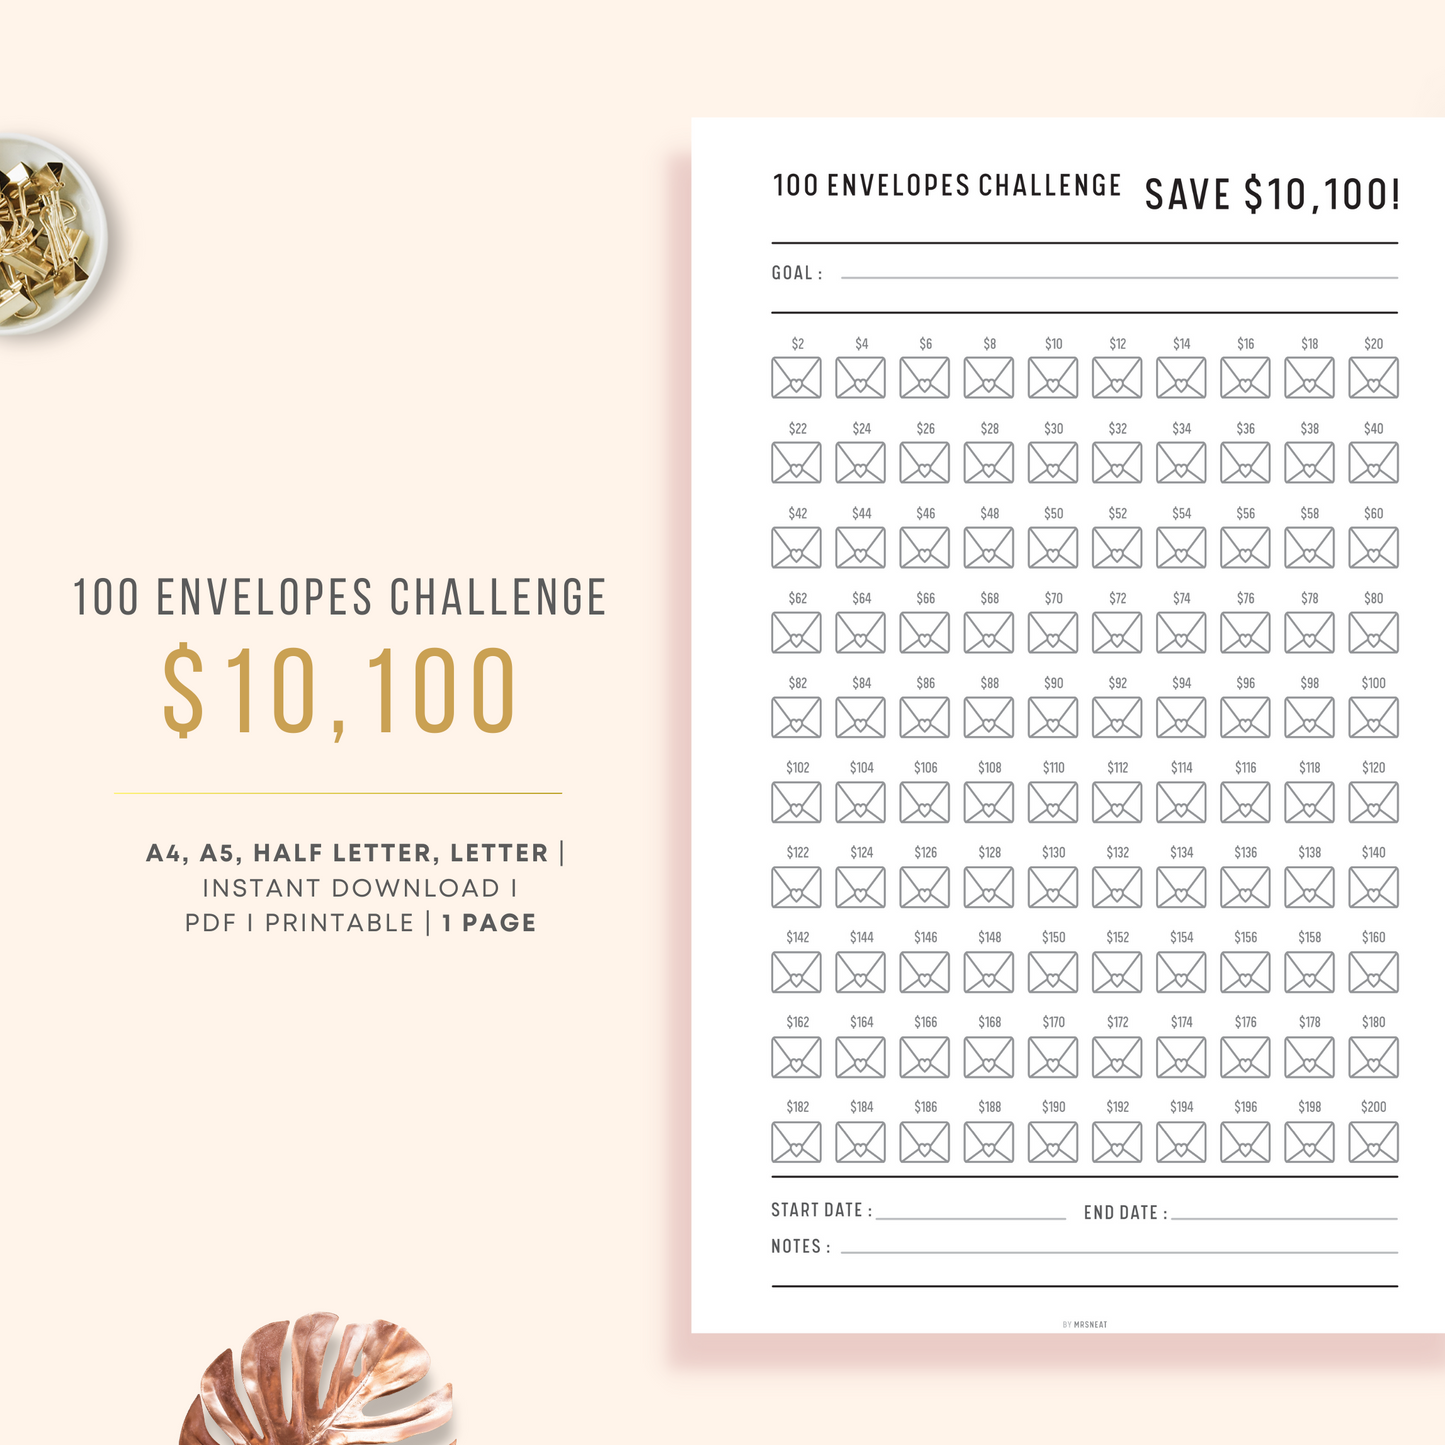 $10,100 in 100 Envelope Challenge Planner with goal, notes, start and finish date